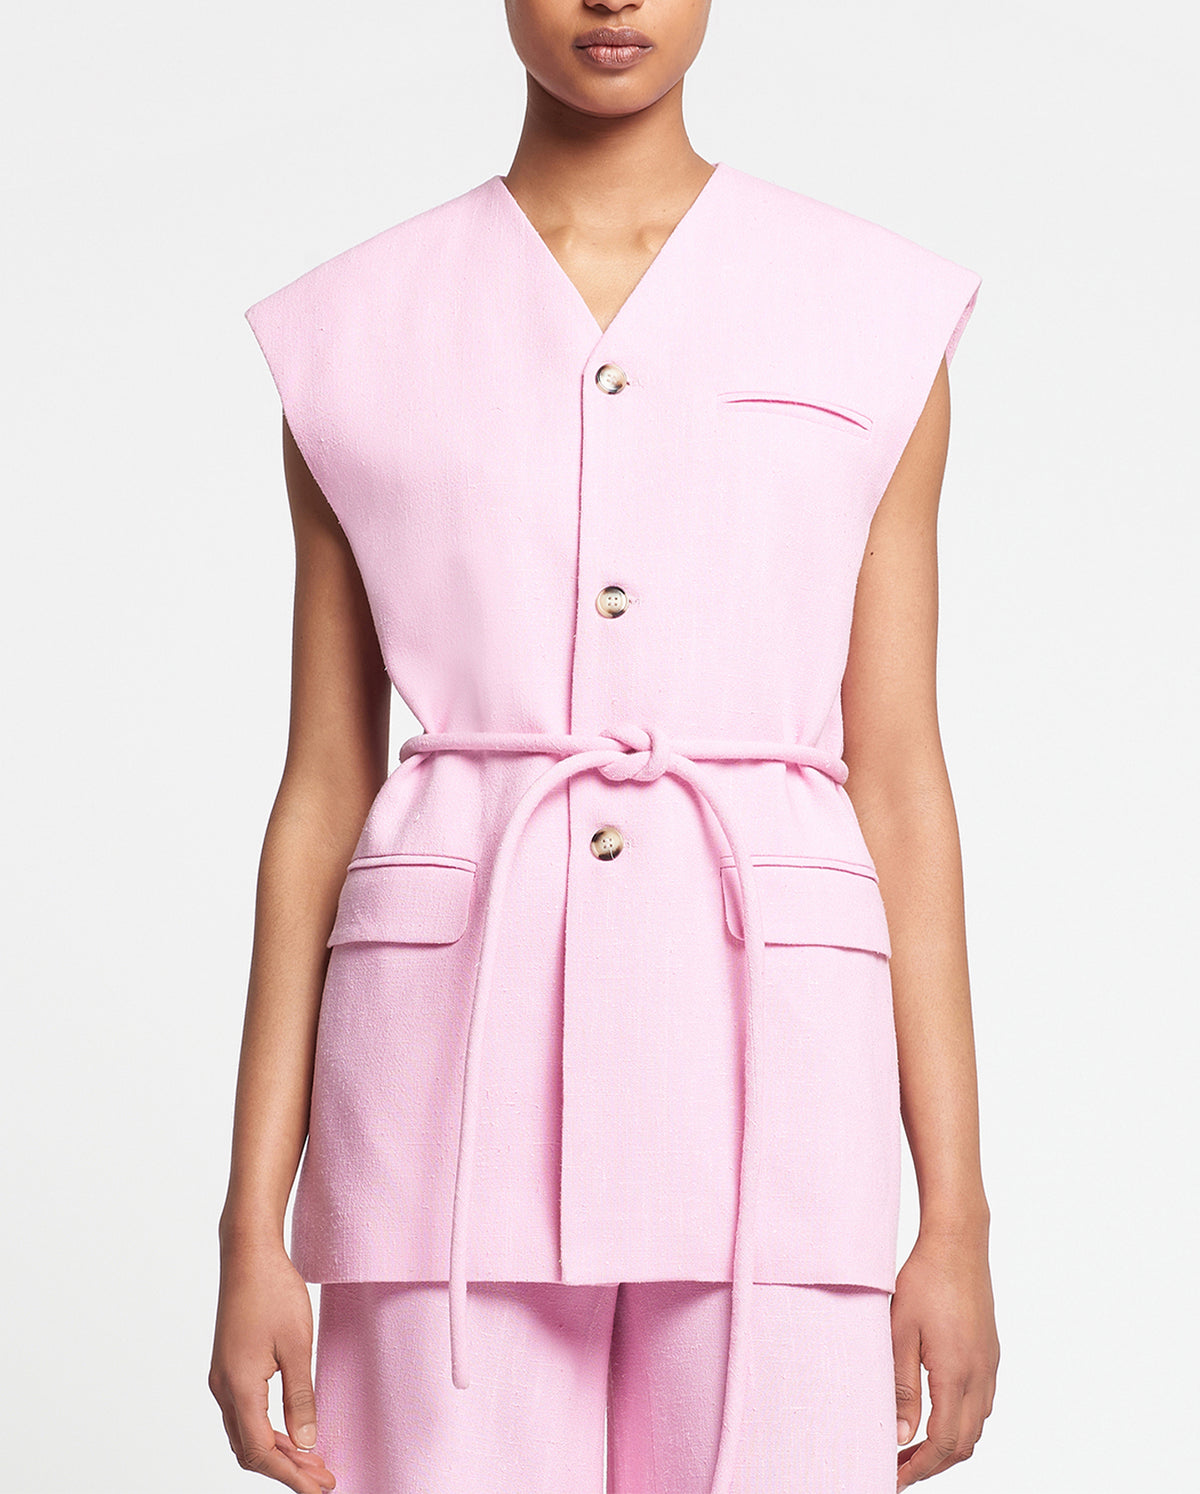 Miriam Orchid Tweed Boxy Tailored Vest